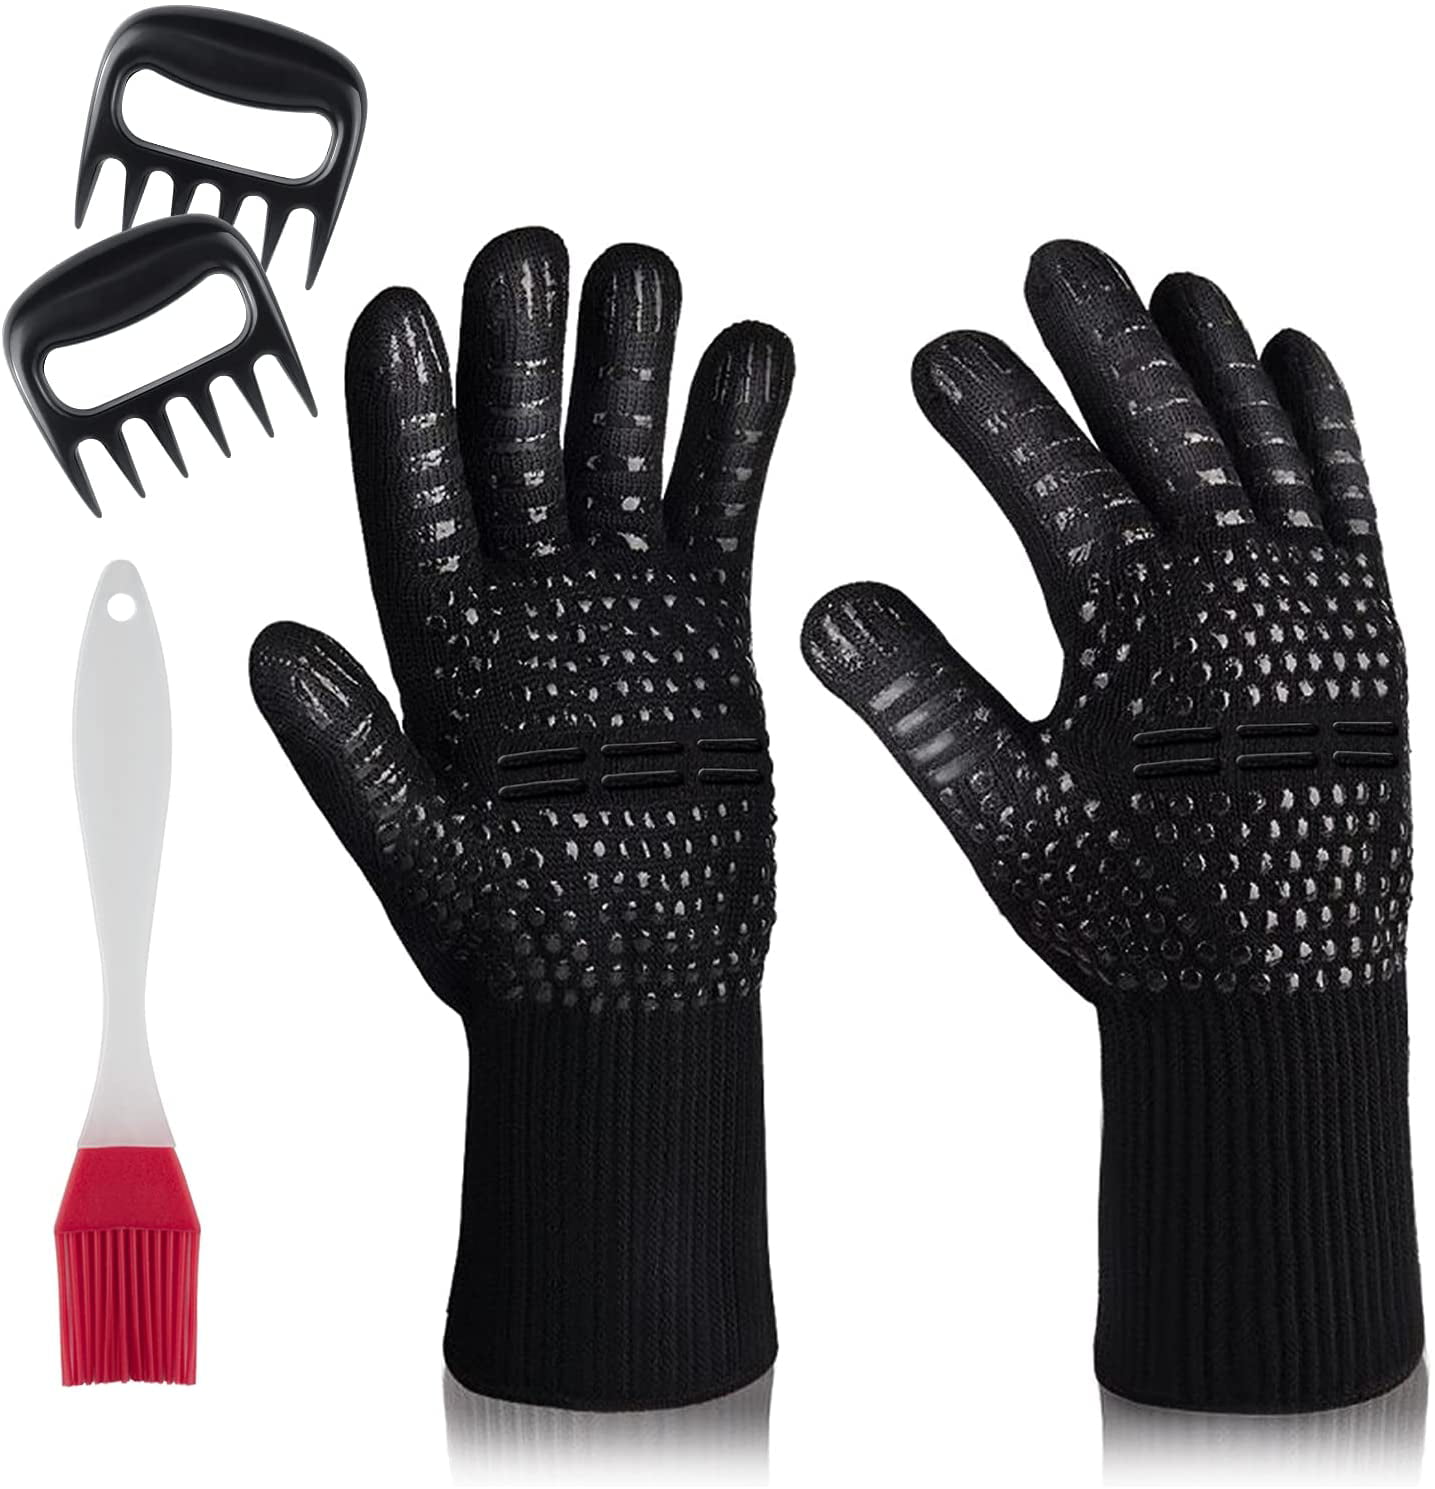 terugvallen Blokkeren Specialiteit BBQ Gloves, 1472°F Extreme Heat Resistant Grill Gloves, Fireproof Gloves  Barbecue Gloves Oven Mitts for Smoker, Cooking, Baking, with Sauce Basting  Brush & Meat Shredder Claws(Black) - Walmart.com